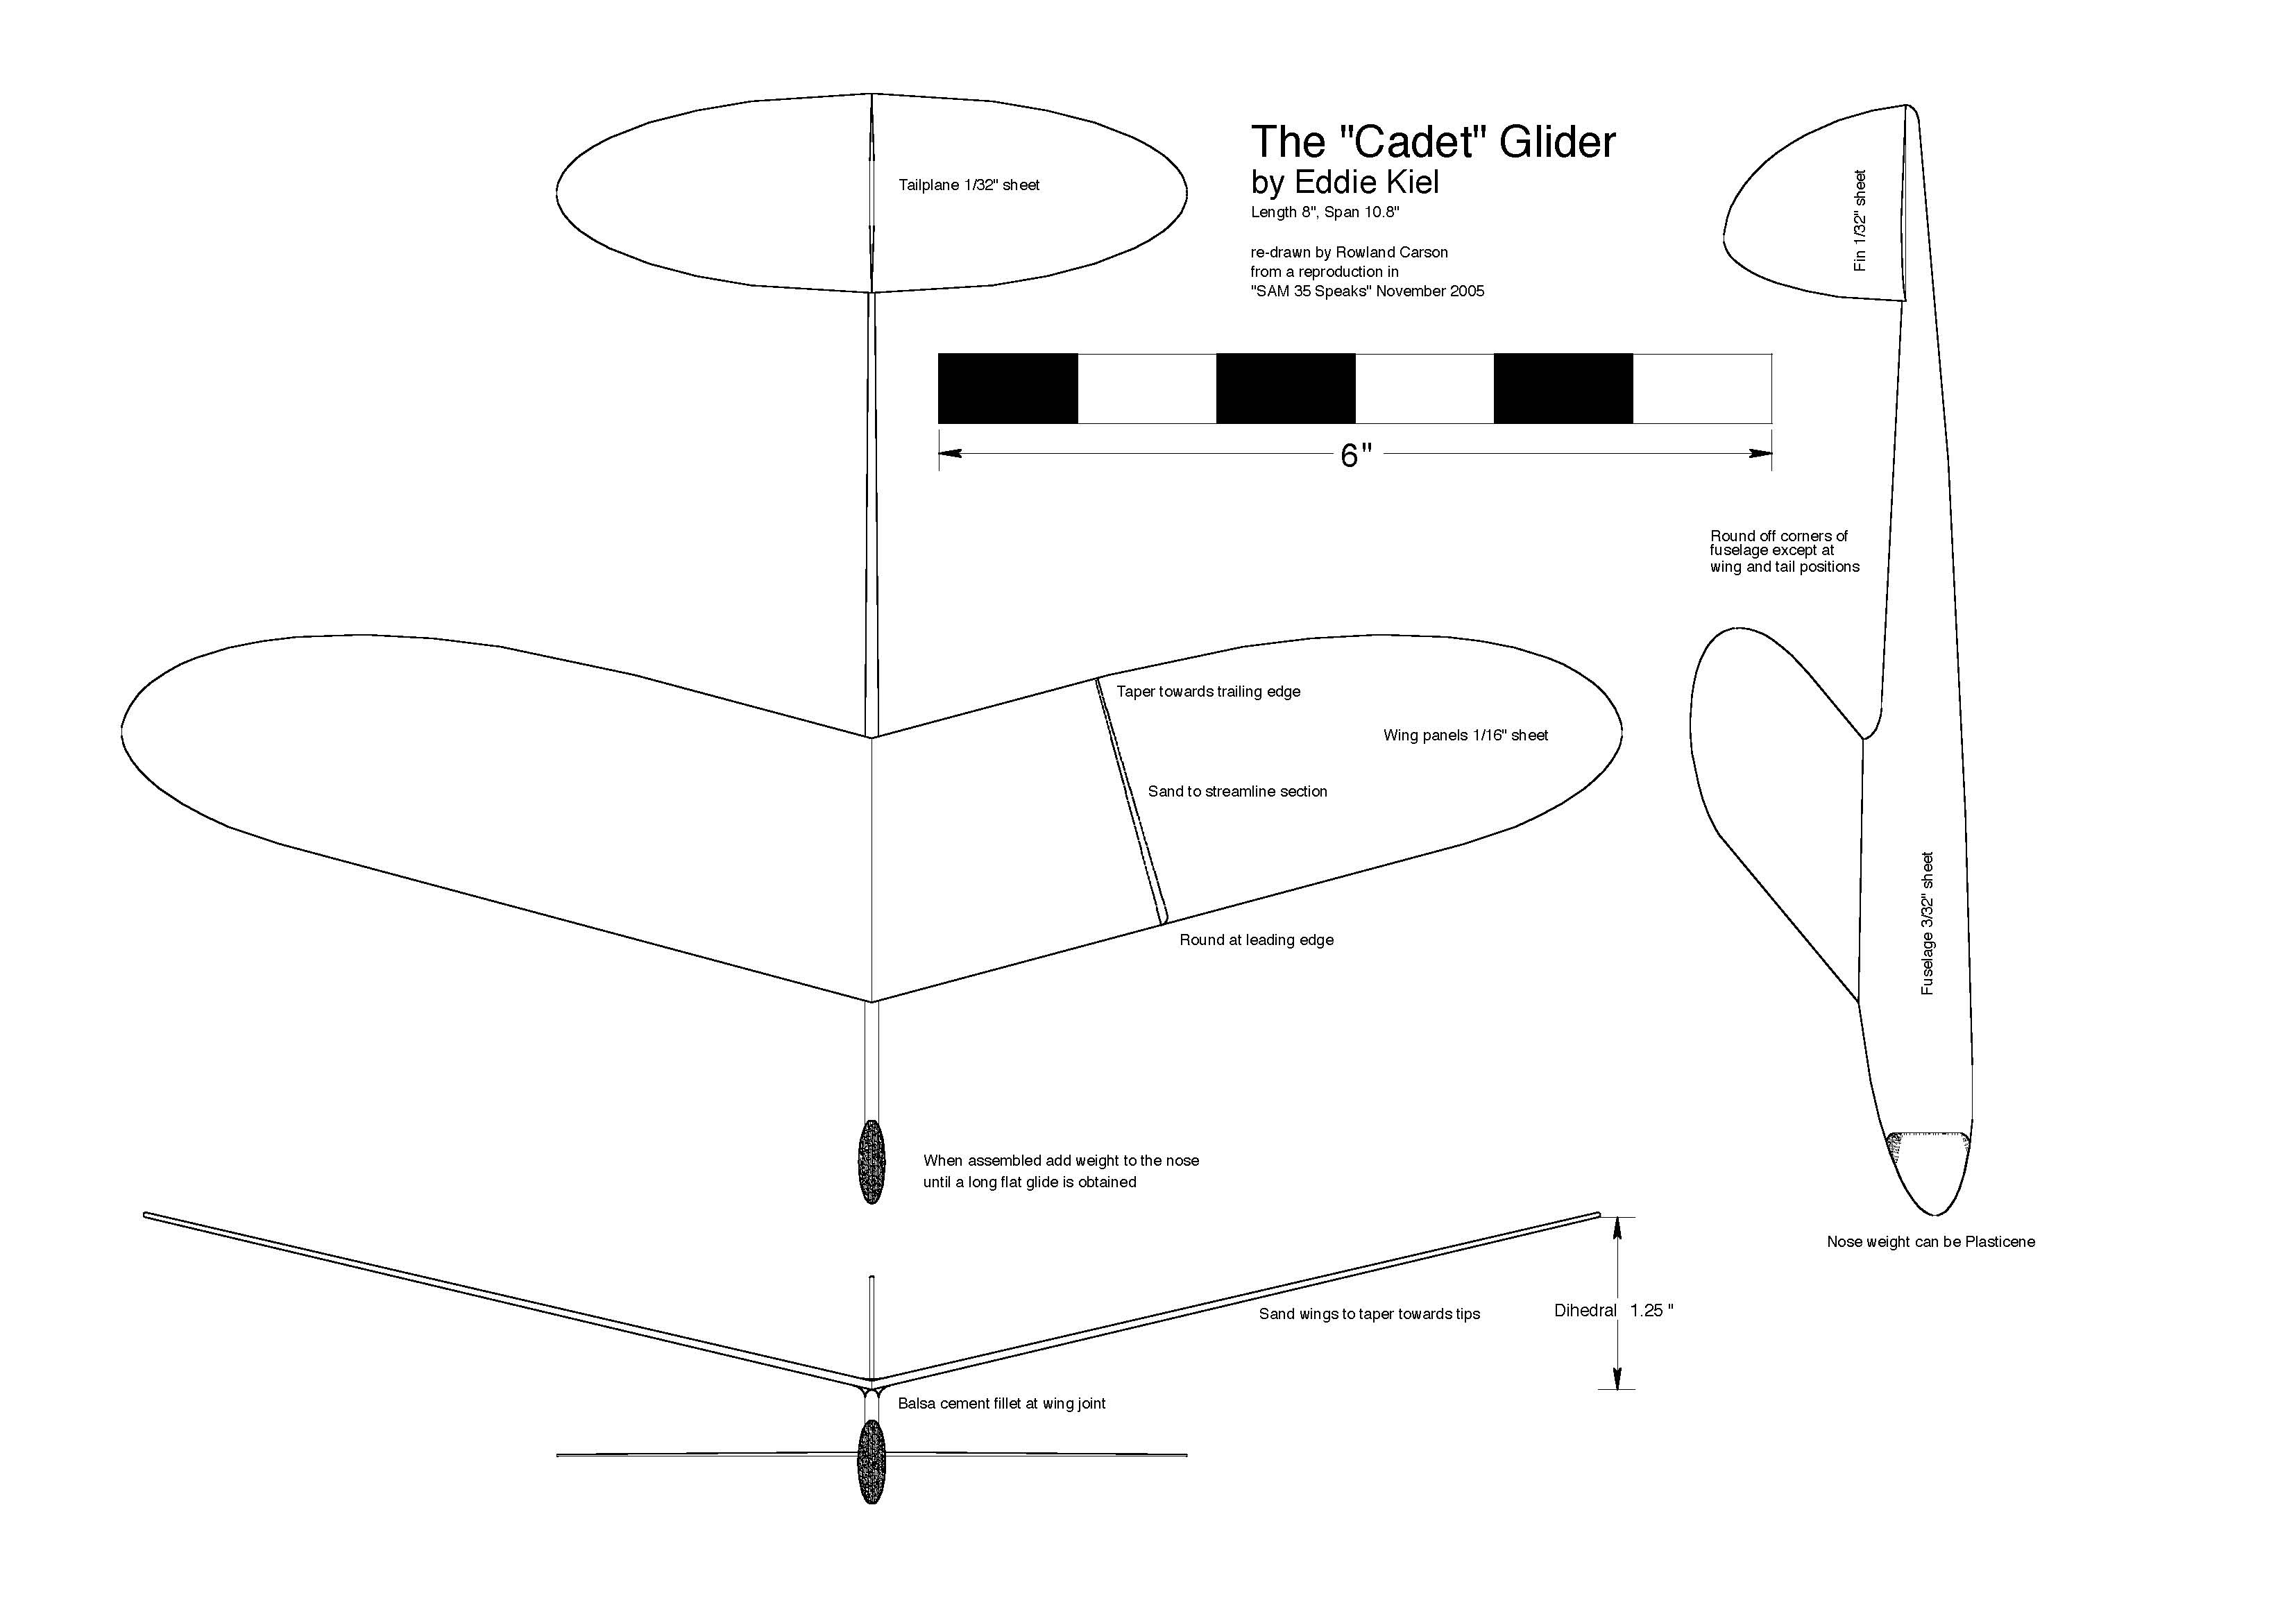 Wooden Balsa Wood Glider Plans Cad making a balsawood plane from plans 